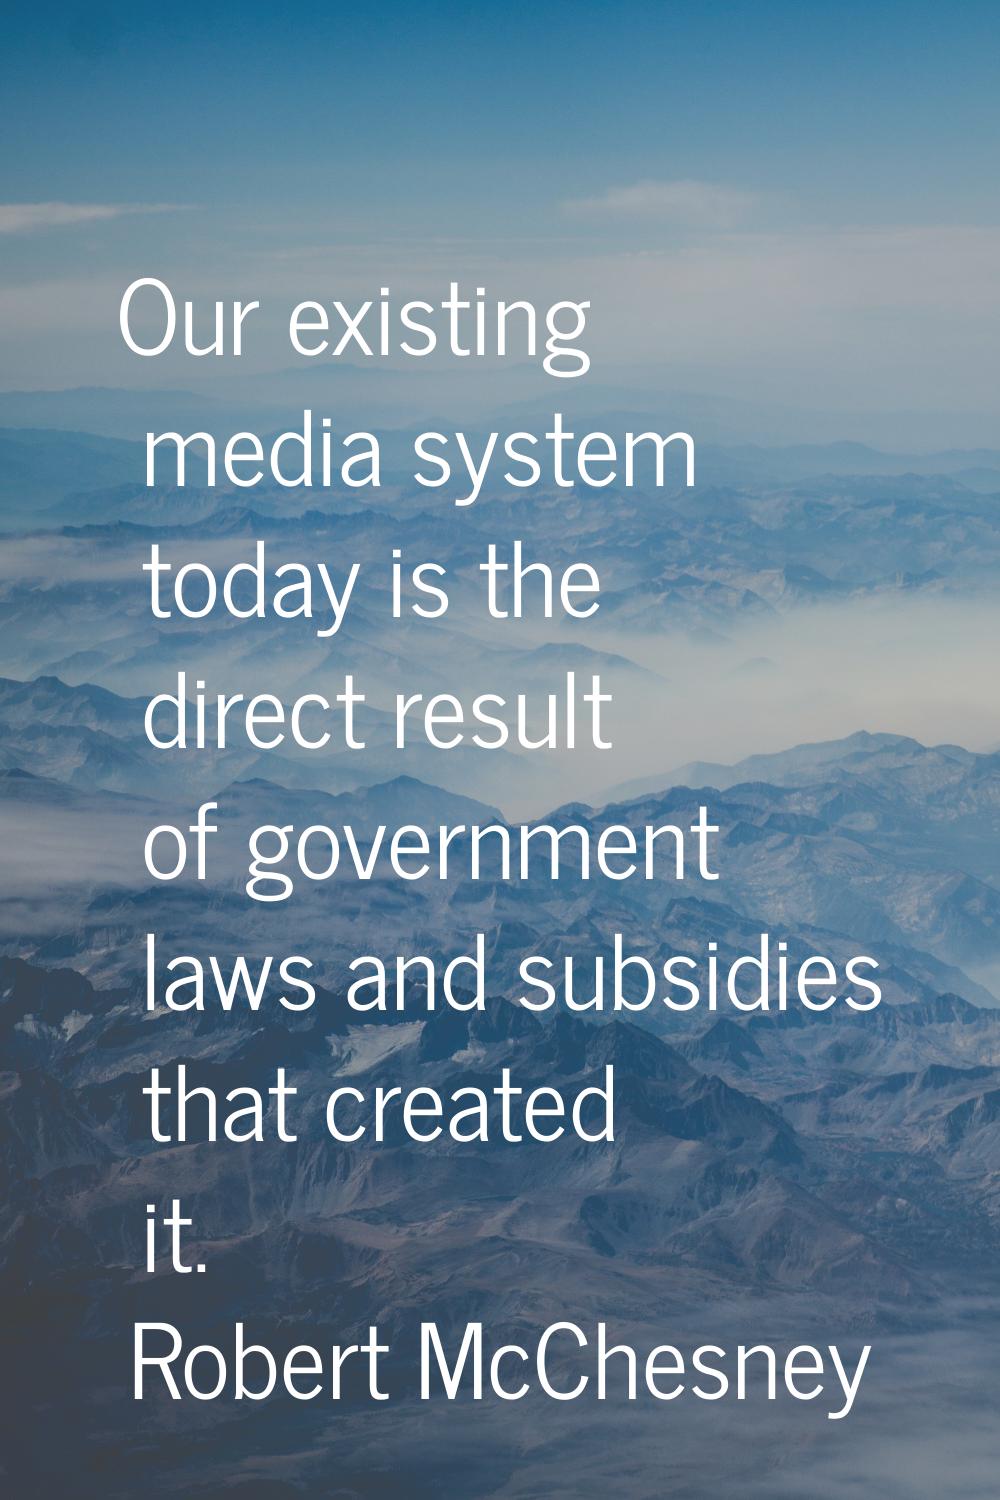 Our existing media system today is the direct result of government laws and subsidies that created 